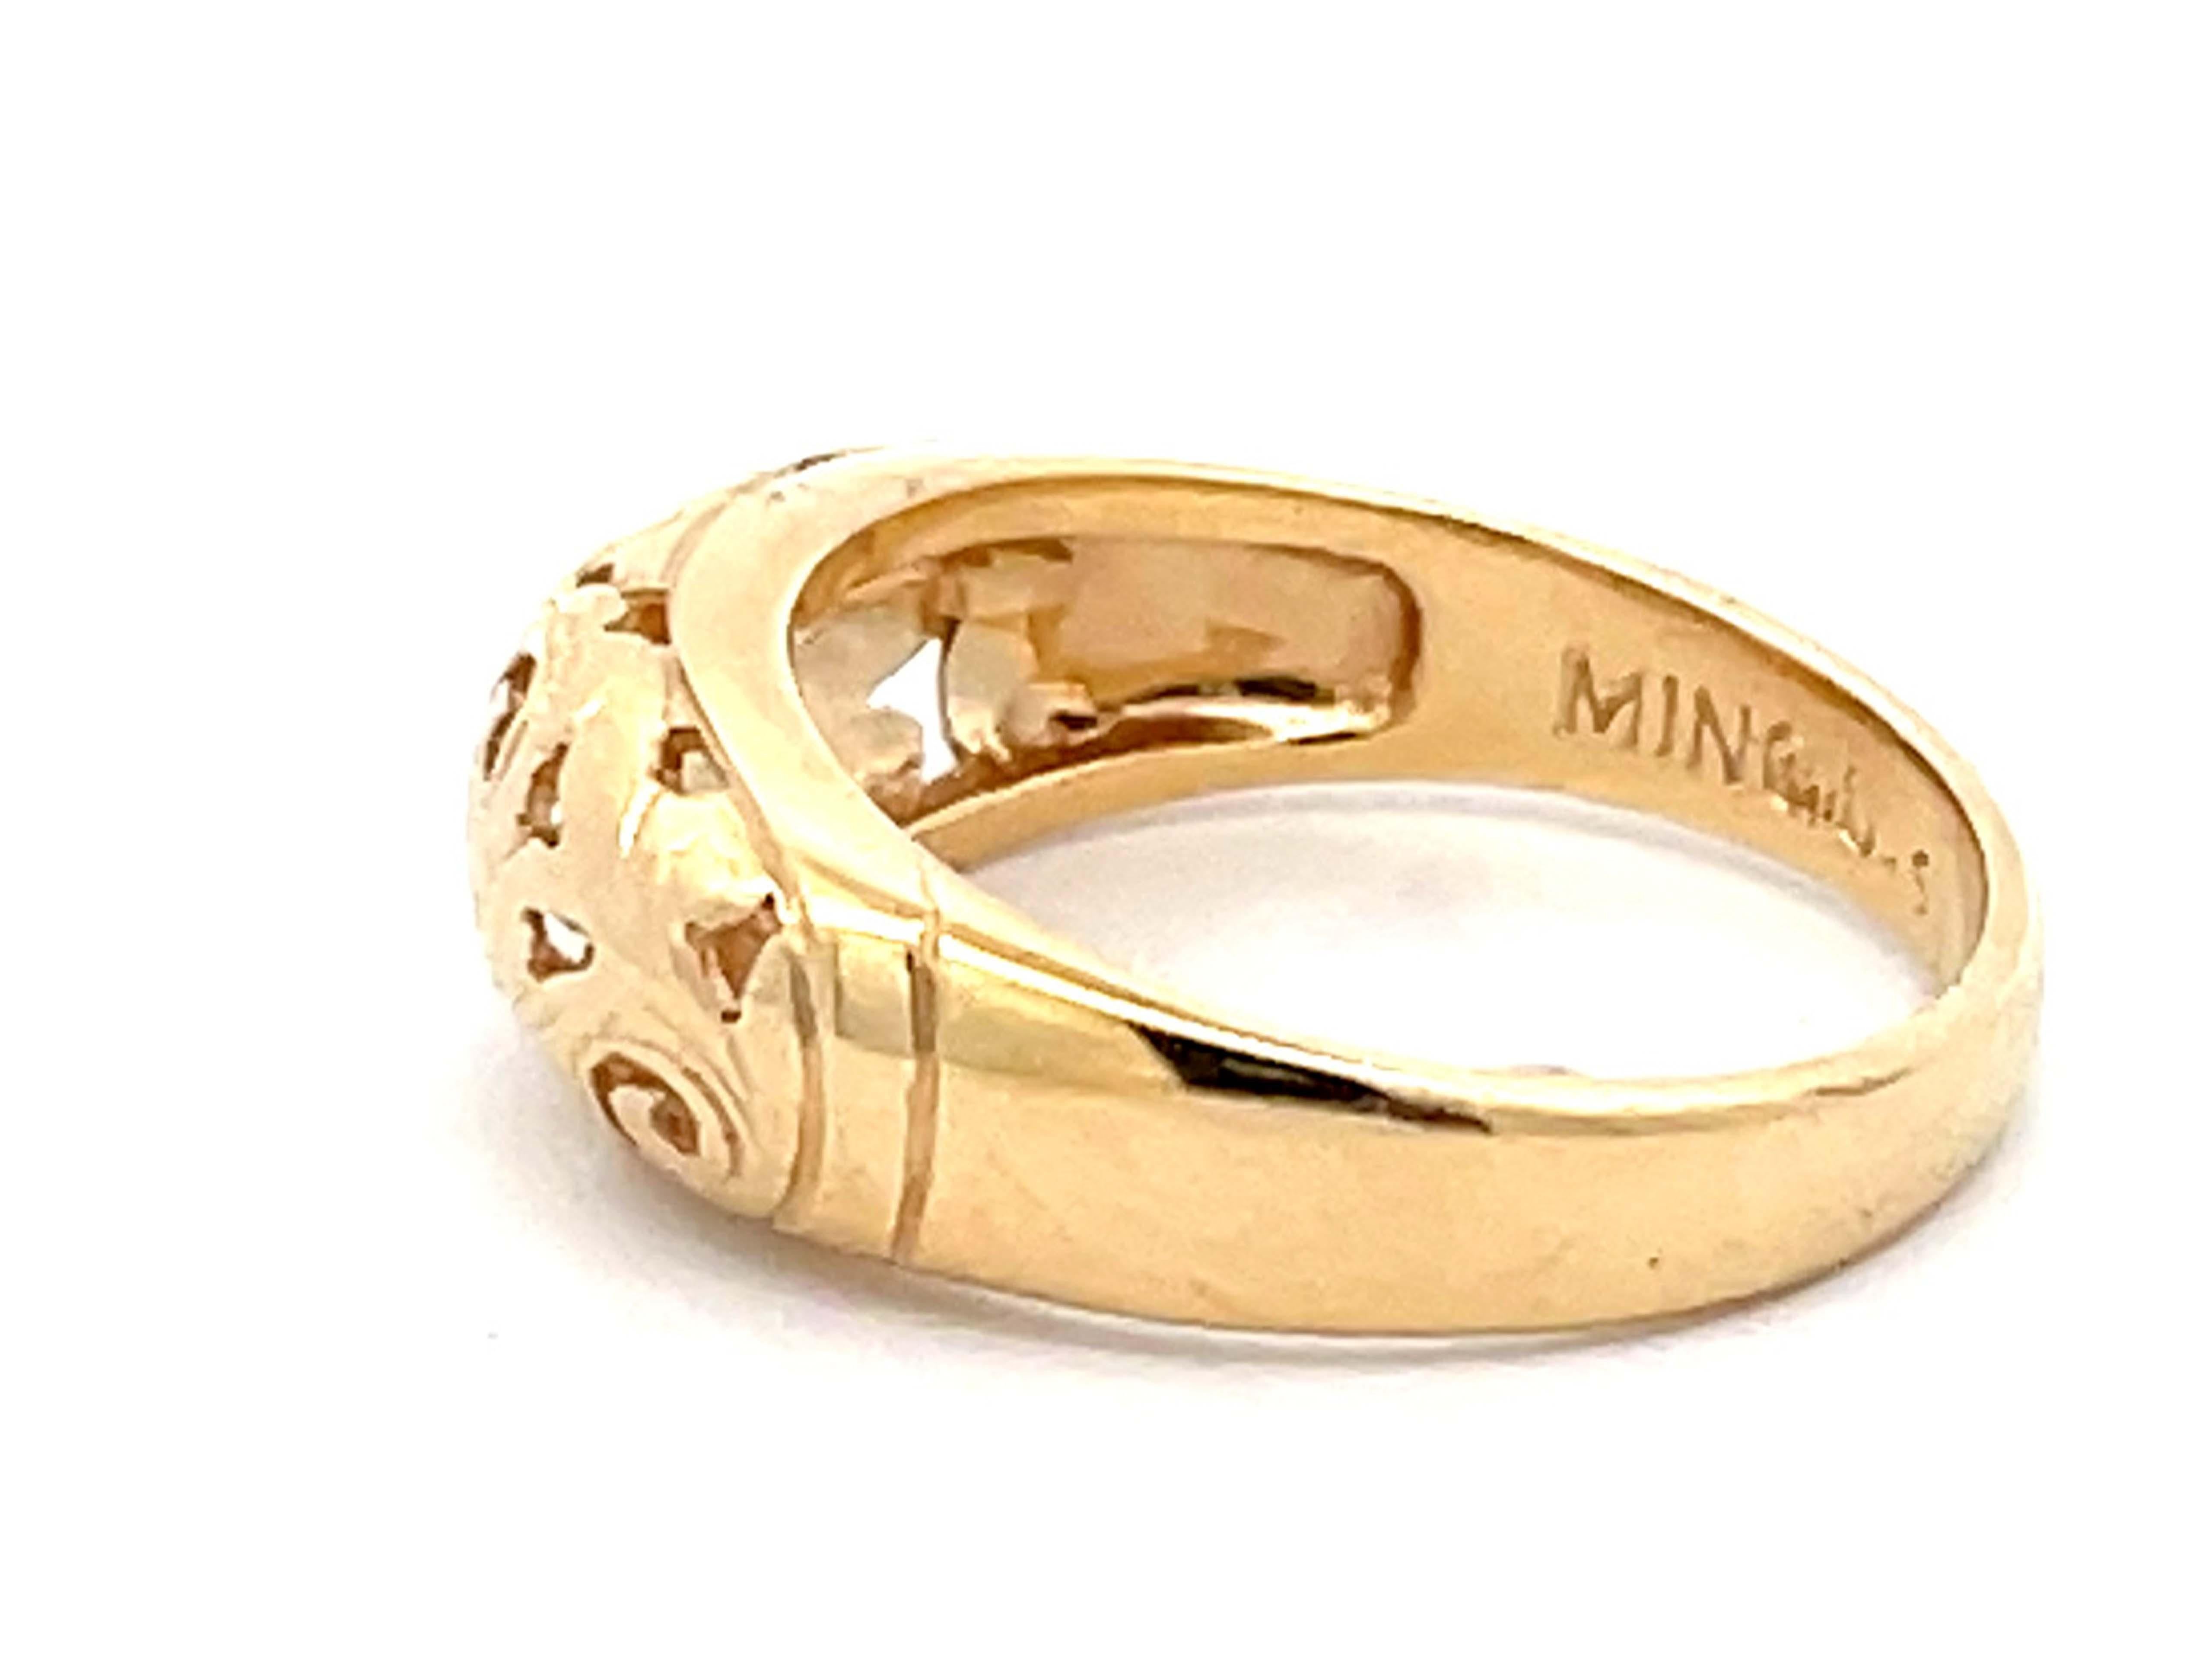 Mings Scroll Cutout Ring in 14k Yellow Gold In Excellent Condition For Sale In Honolulu, HI